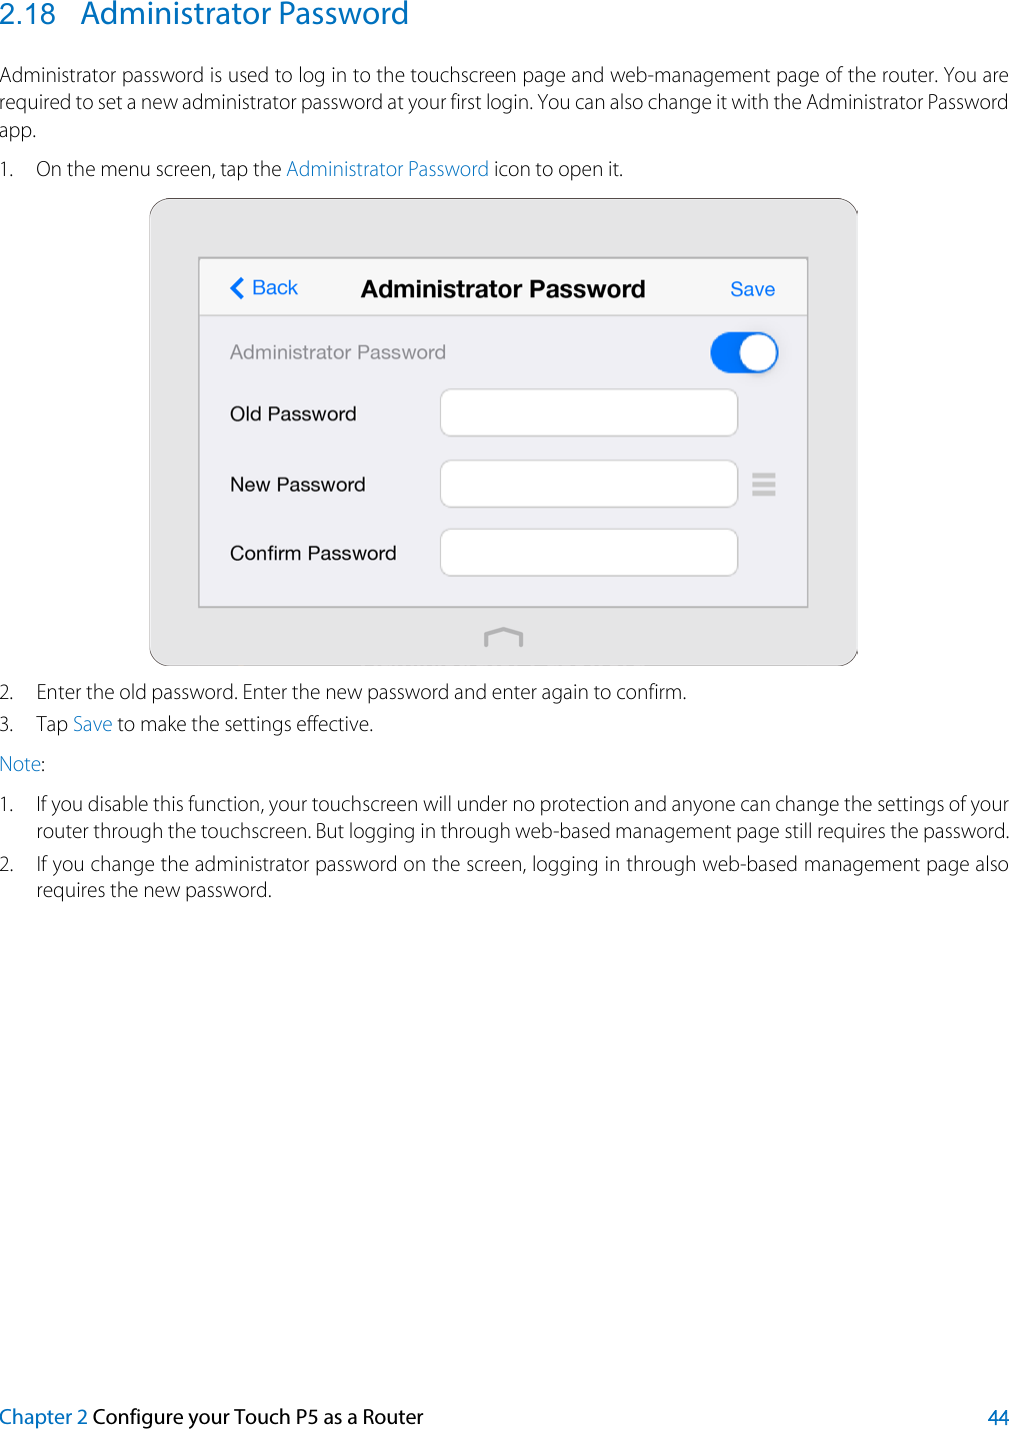  2.18 Administrator Password Administrator password is used to log in to the touchscreen page and web-management page of the router. You are required to set a new administrator password at your first login. You can also change it with the Administrator Password app. 1. On the menu screen, tap the Administrator Password icon to open it.  2. Enter the old password. Enter the new password and enter again to confirm. 3. Tap Save to make the settings effective. Note:   1. If you disable this function, your touchscreen will under no protection and anyone can change the settings of your router through the touchscreen. But logging in through web-based management page still requires the password. 2. If you change the administrator password on the screen, logging in through web-based management page also requires the new password.    Chapter 2 Configure your Touch P5 as a Router 44 